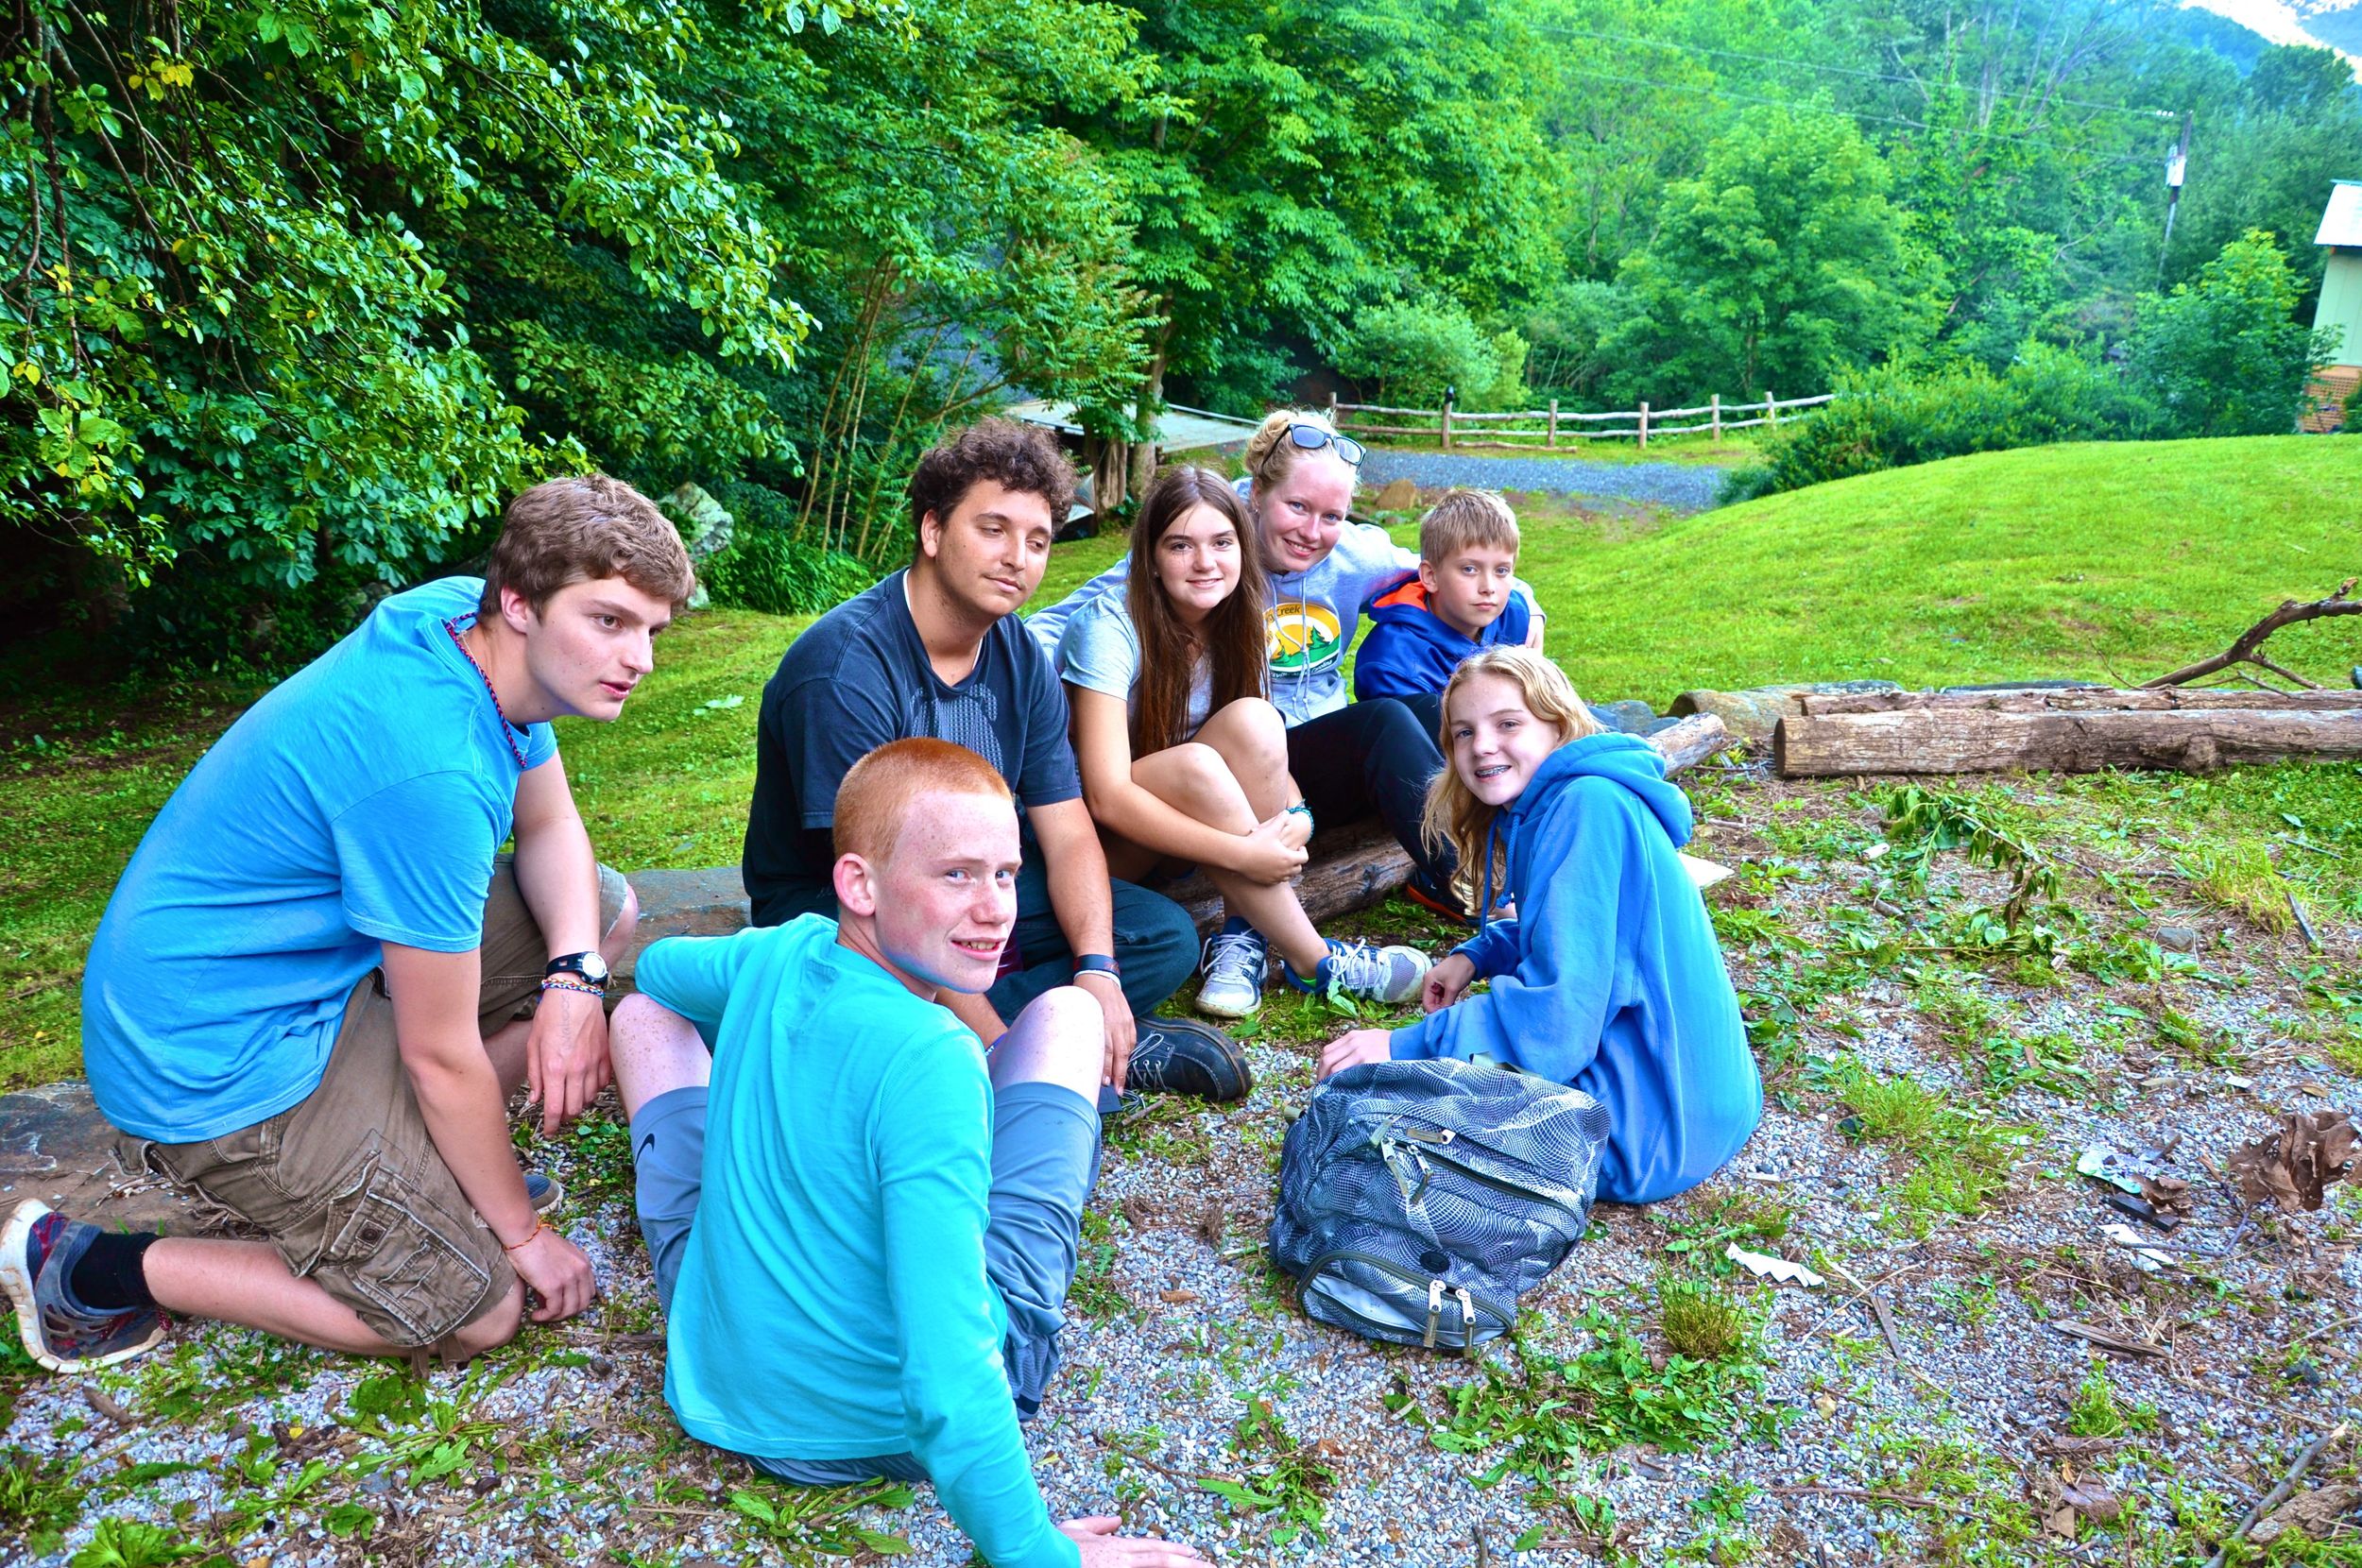 group-huddle-around-the-fire-before-it-gets-dark-and-the-smores-come-out.jpg